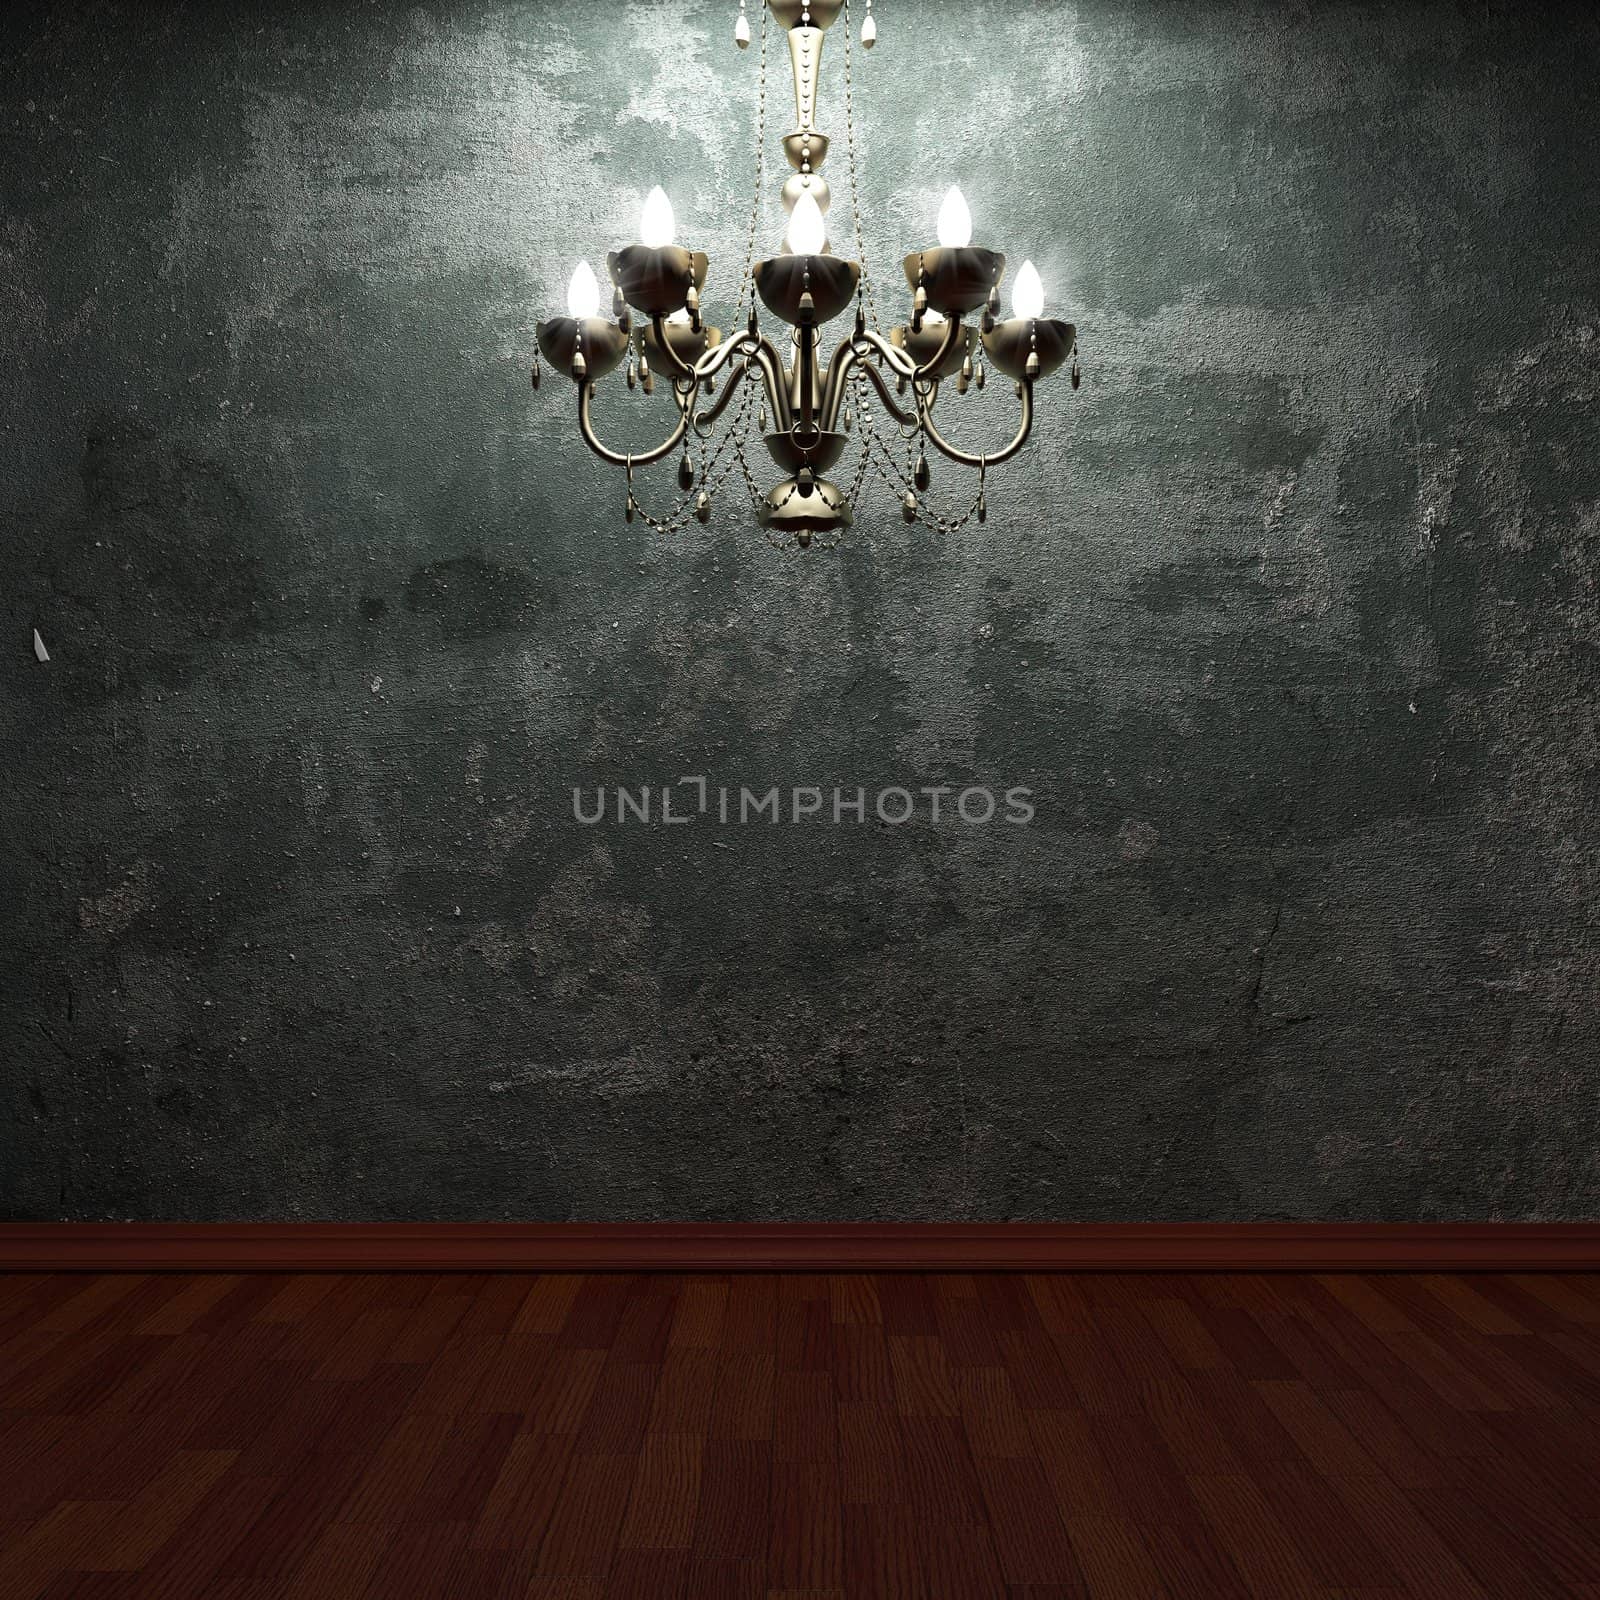 old concrete wall and chandelier made in 3D graphics